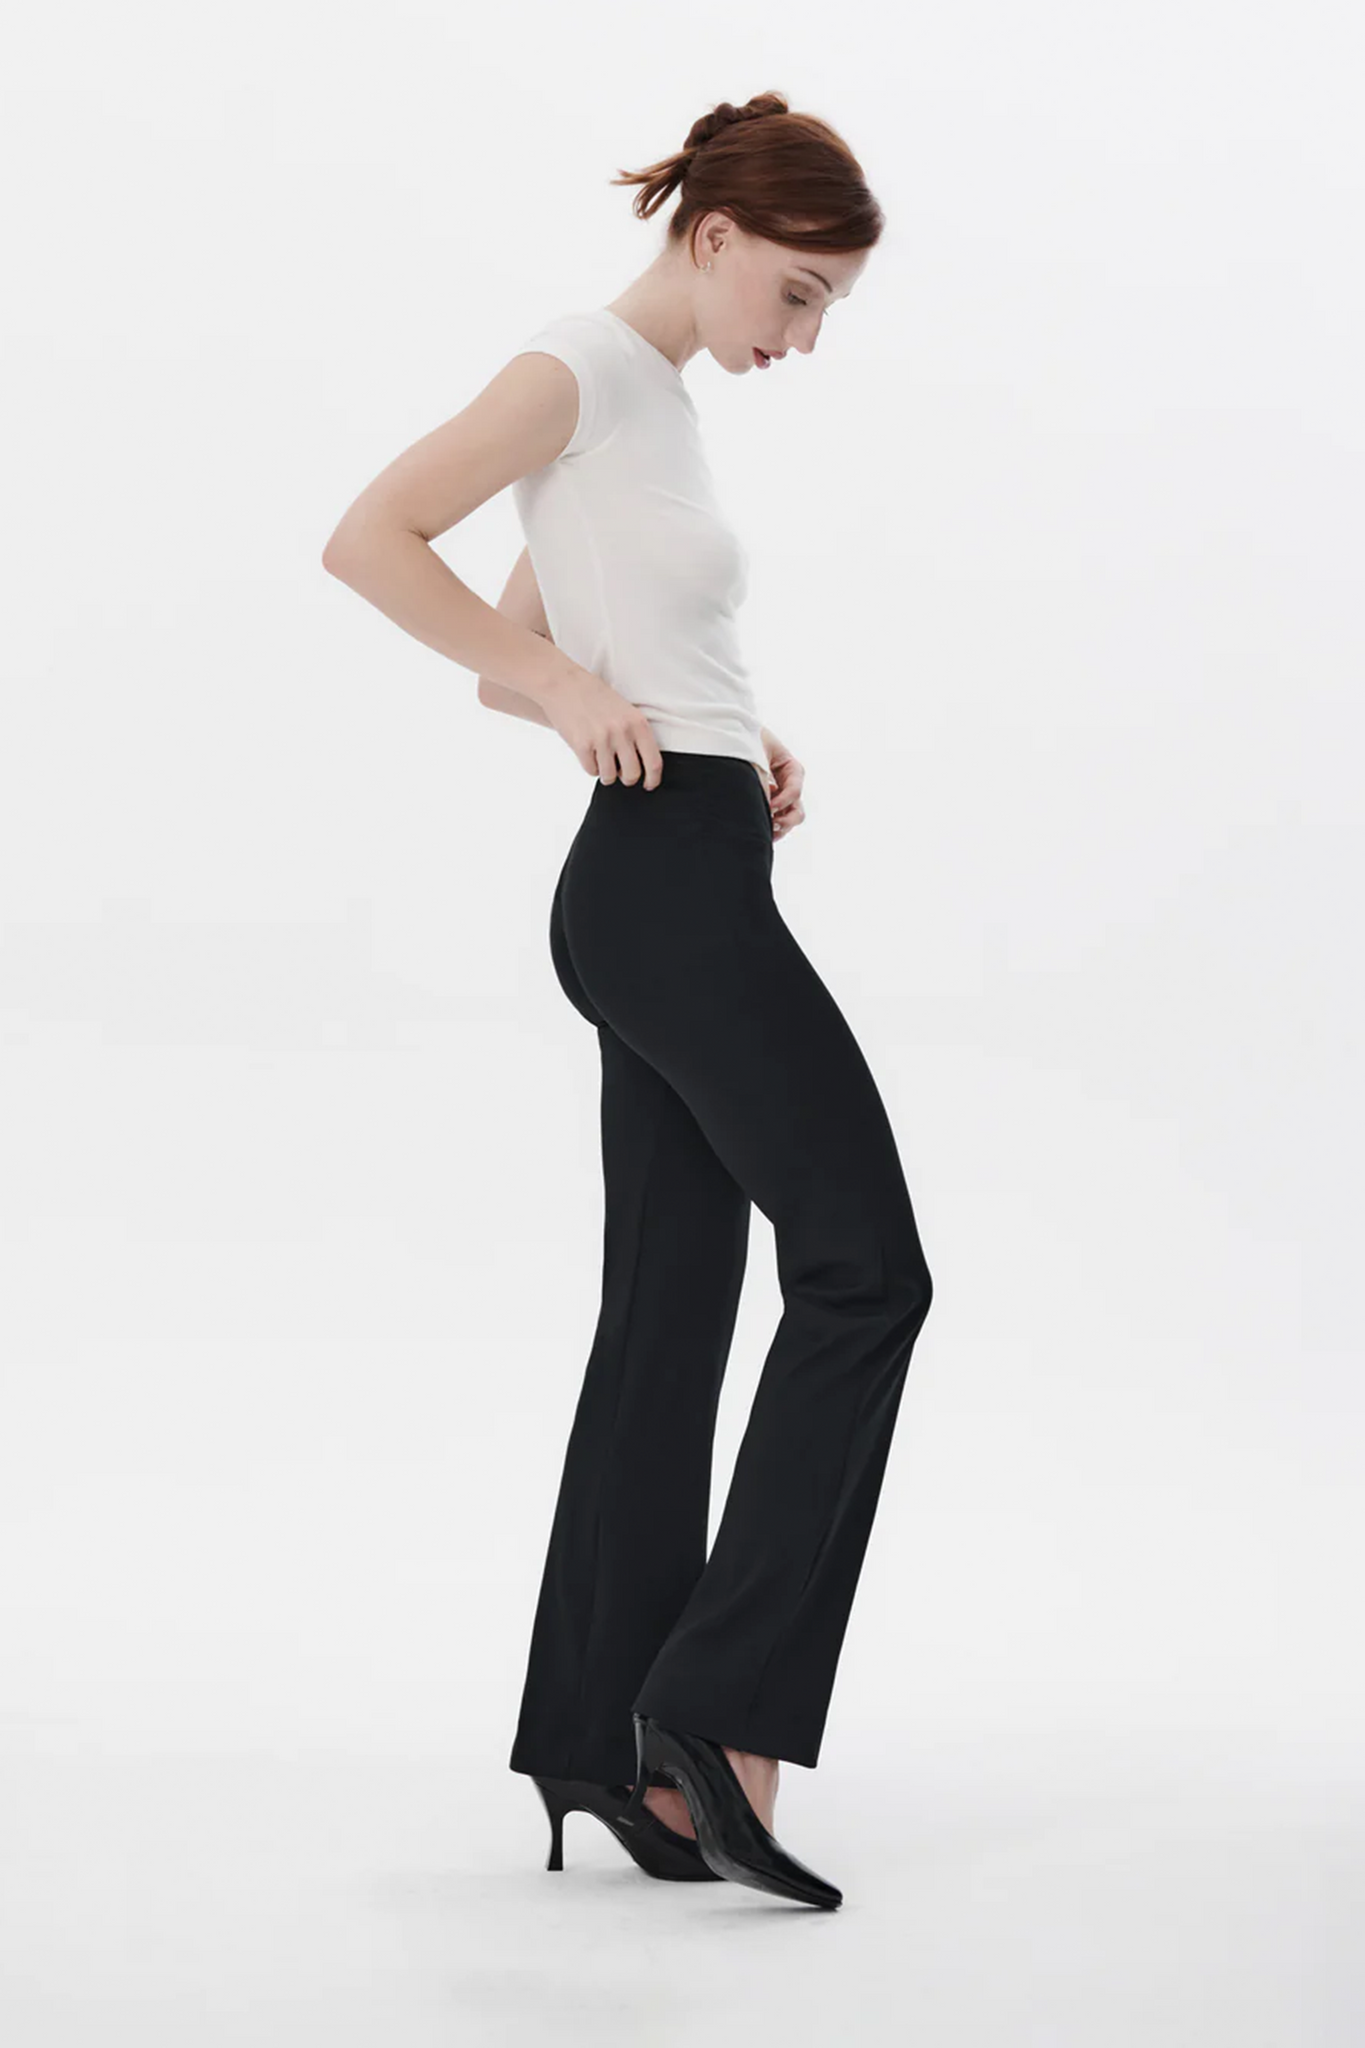 The Stretch Trouser - That Looks